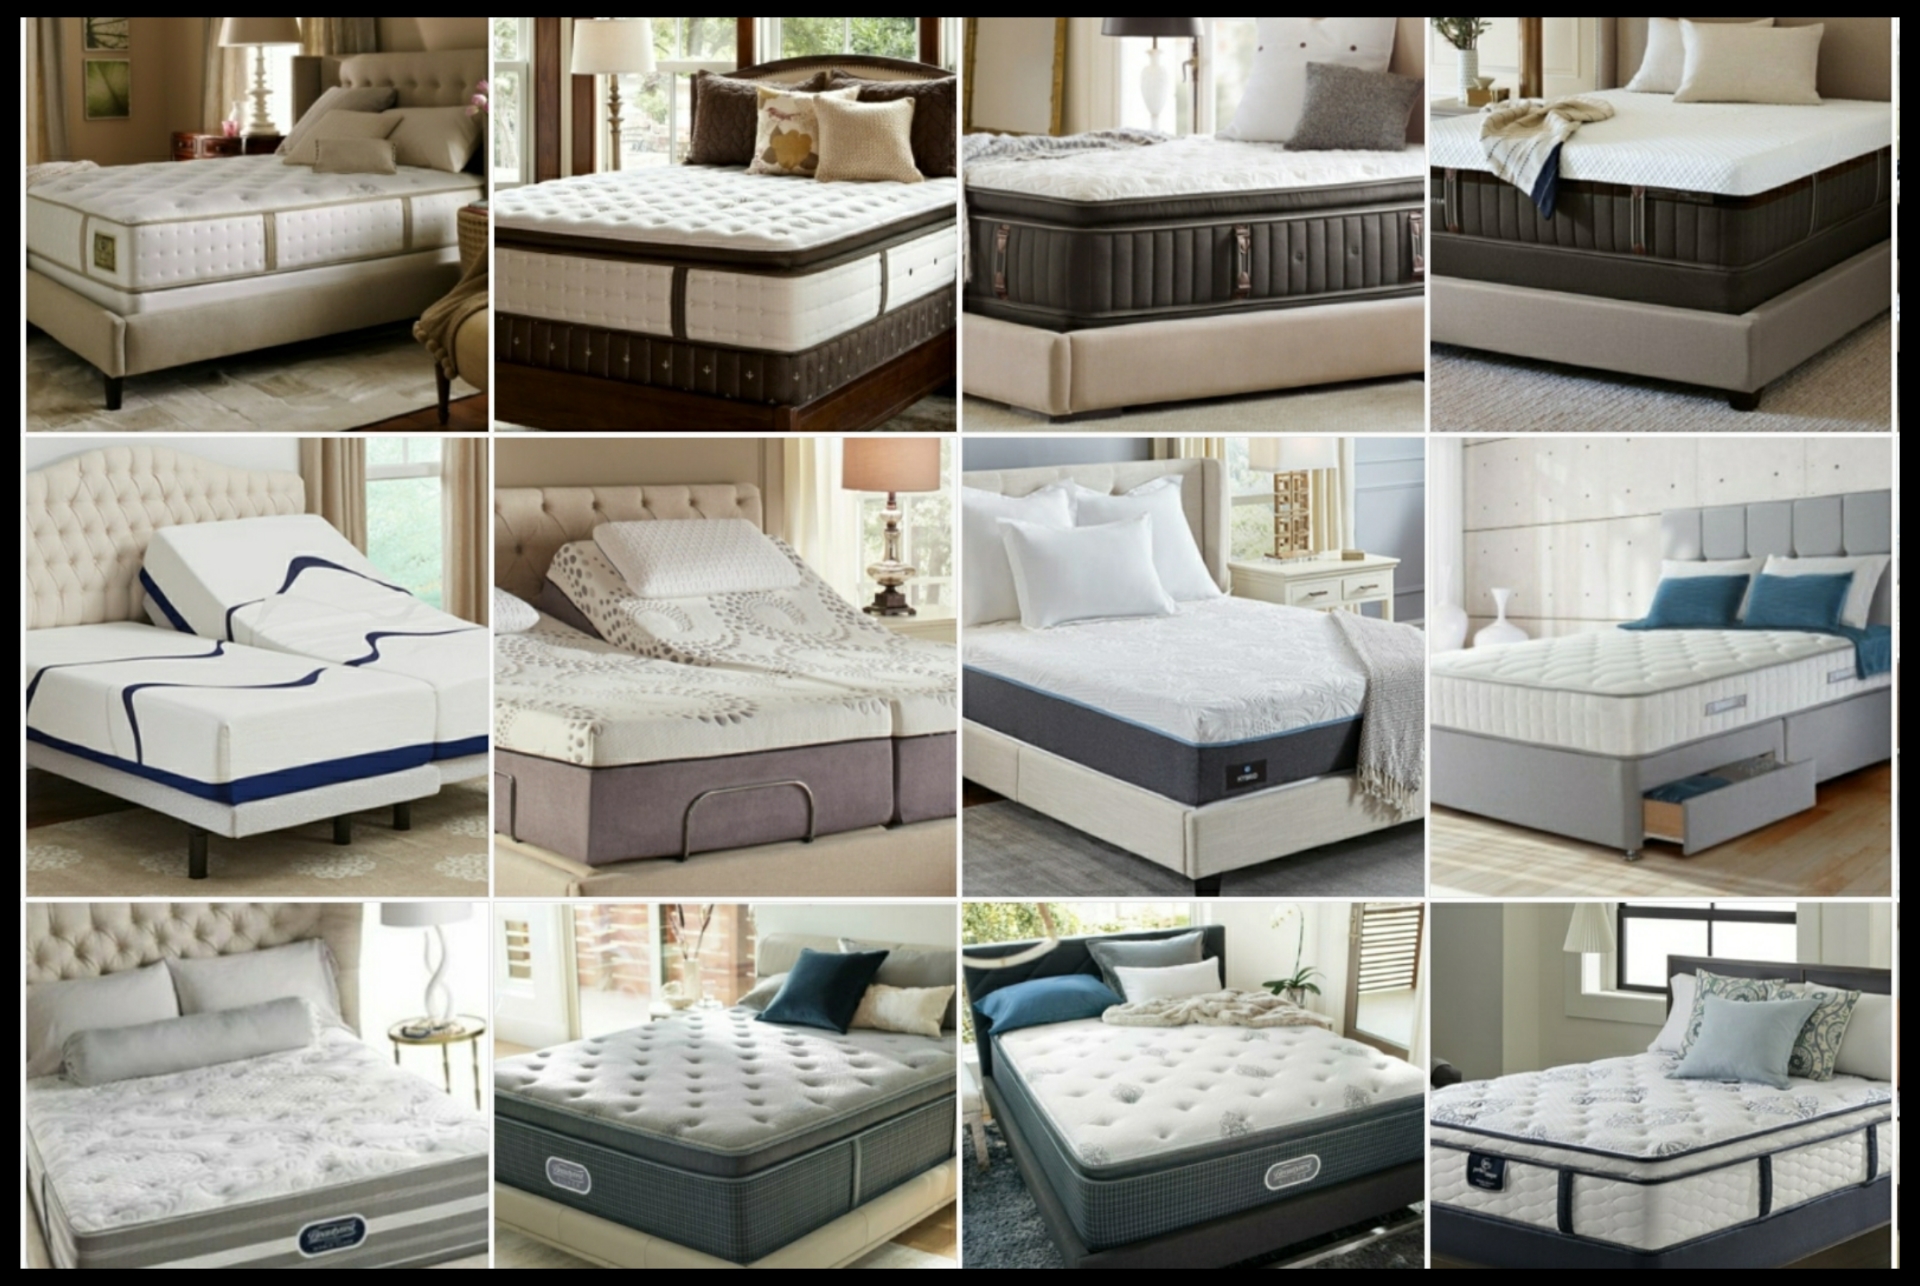 Naptime Discount Mattress in Hanover PA 17331